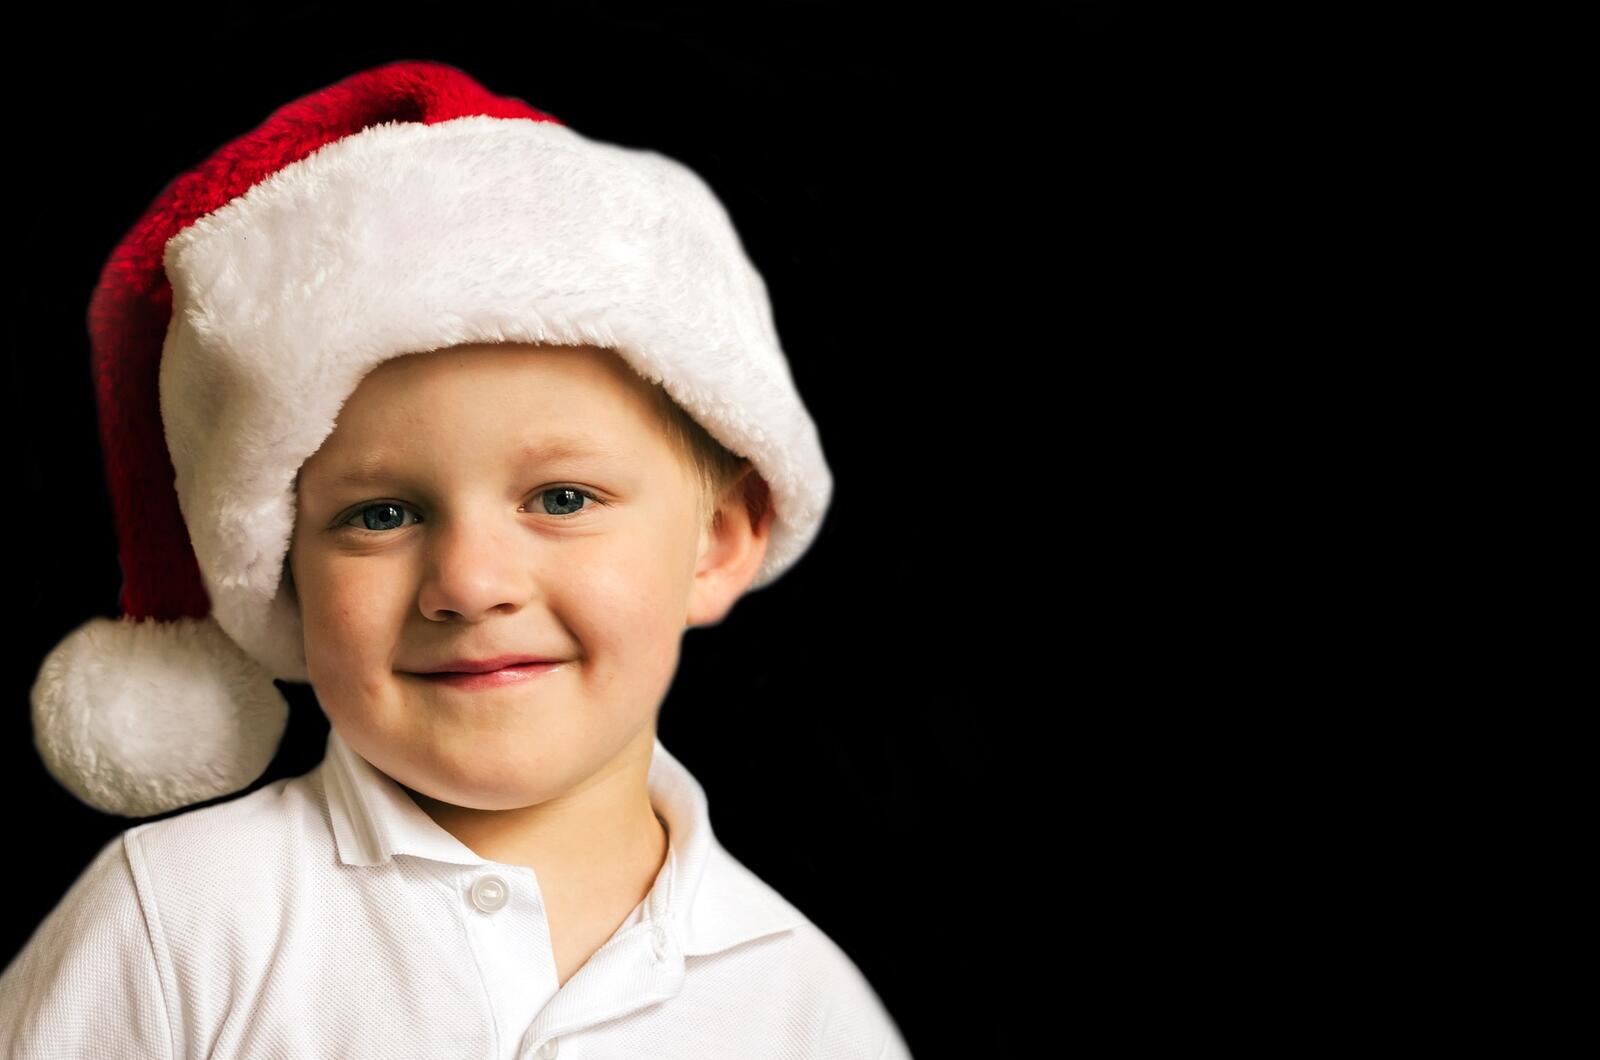 Free photo A boy in a New Year`s hat of Santa Claus.